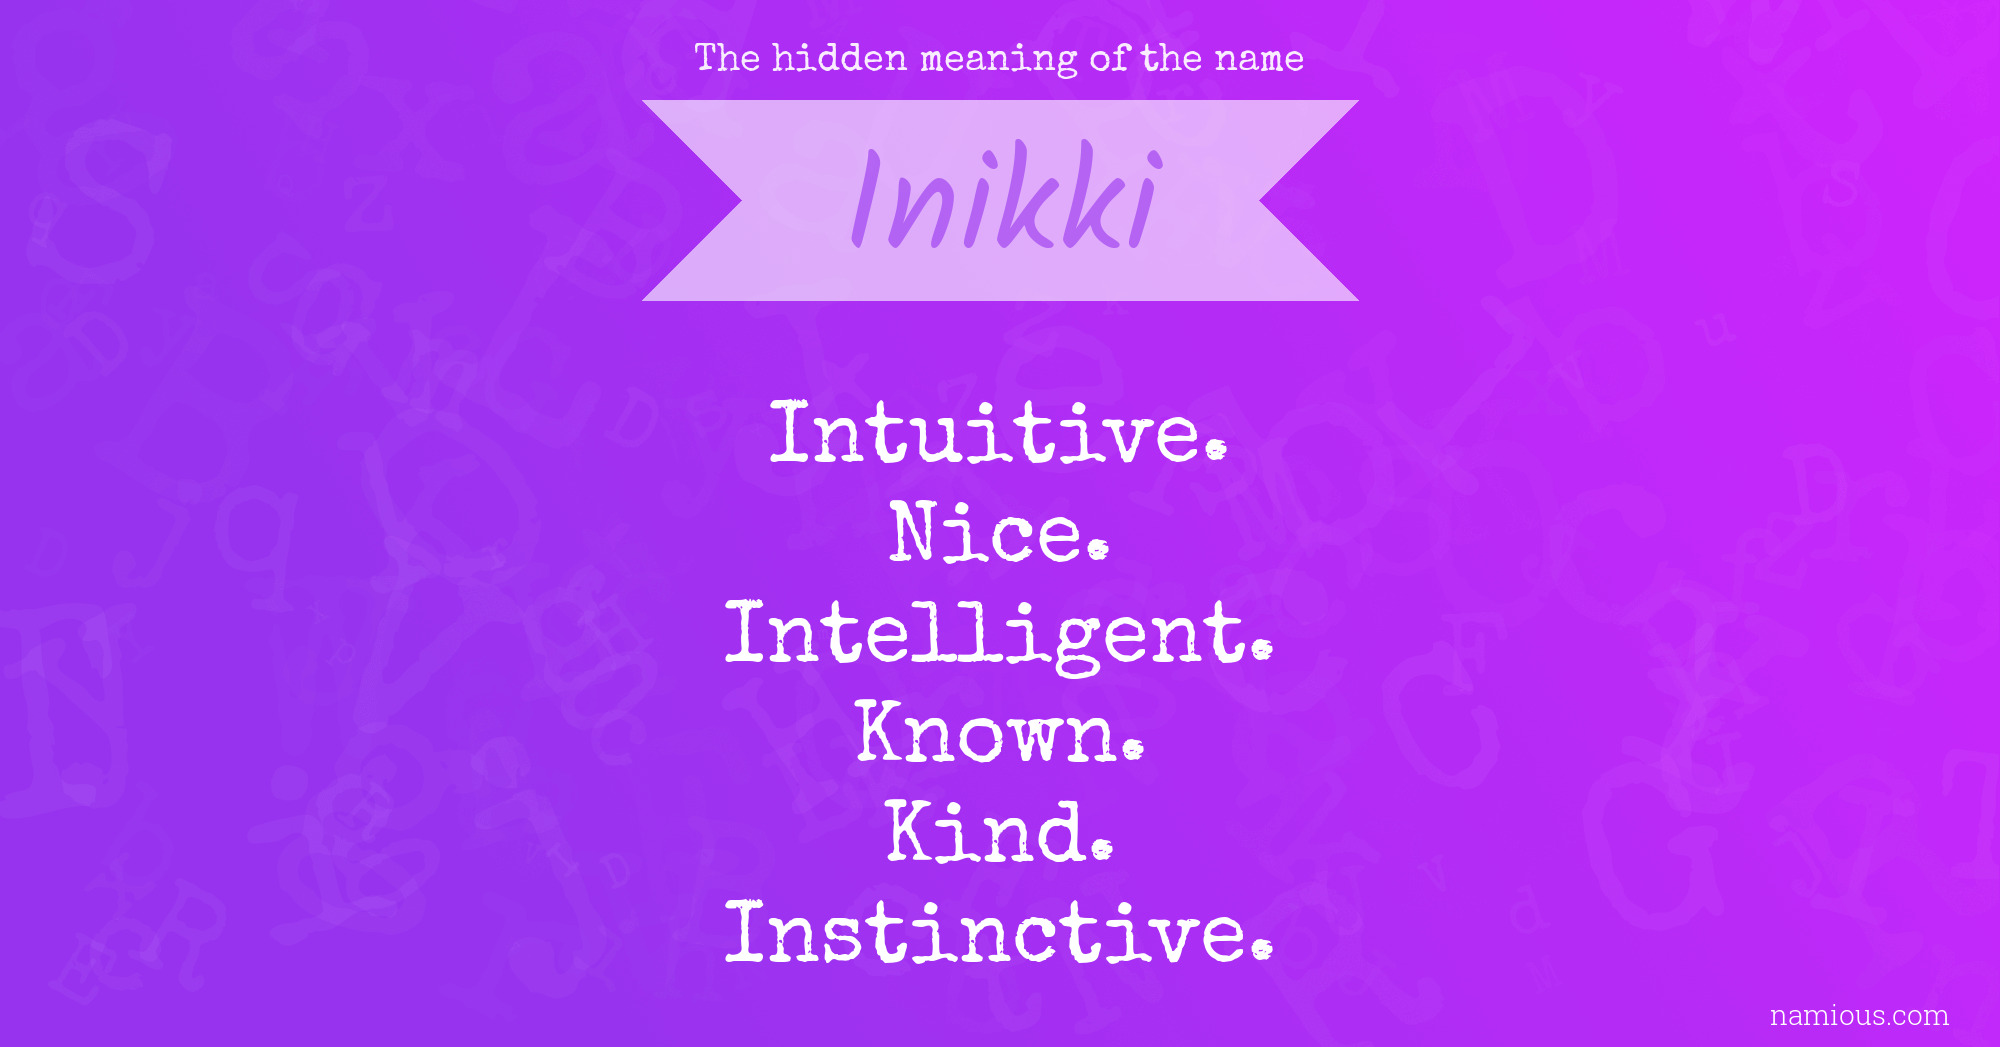 The hidden meaning of the name Inikki